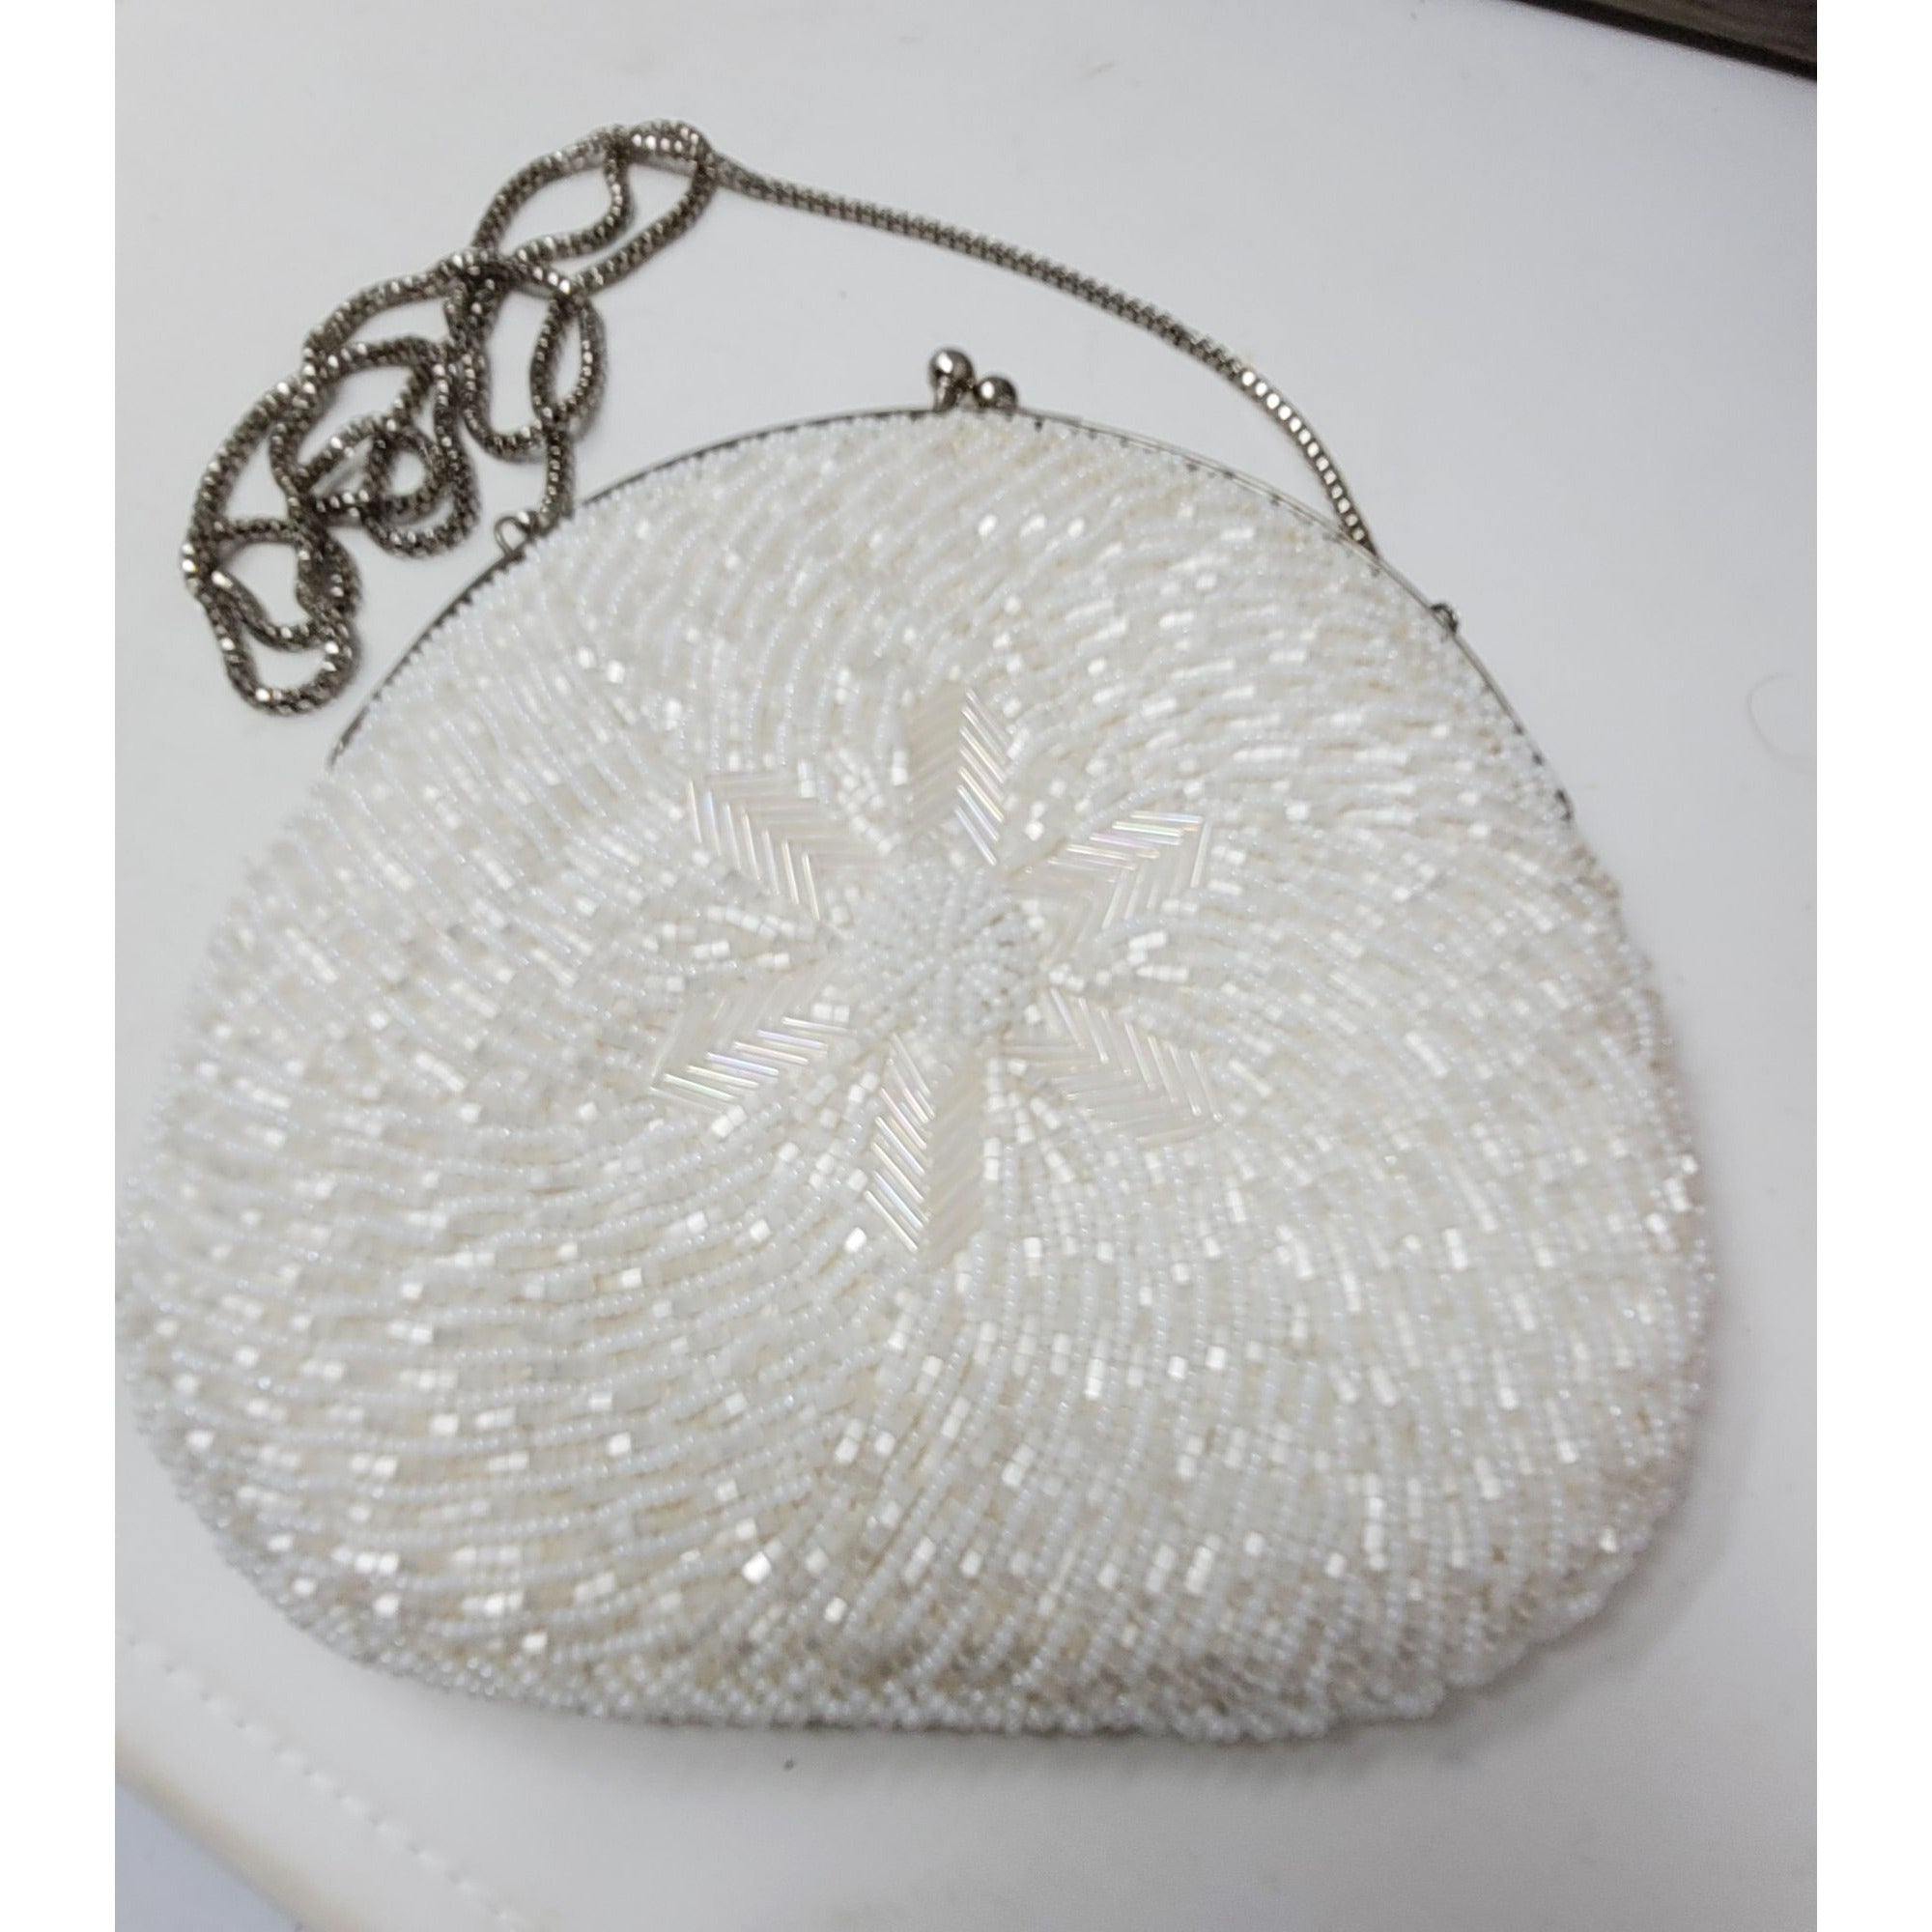 Stunning Glass Beaded Bag Clutch Silver Chain